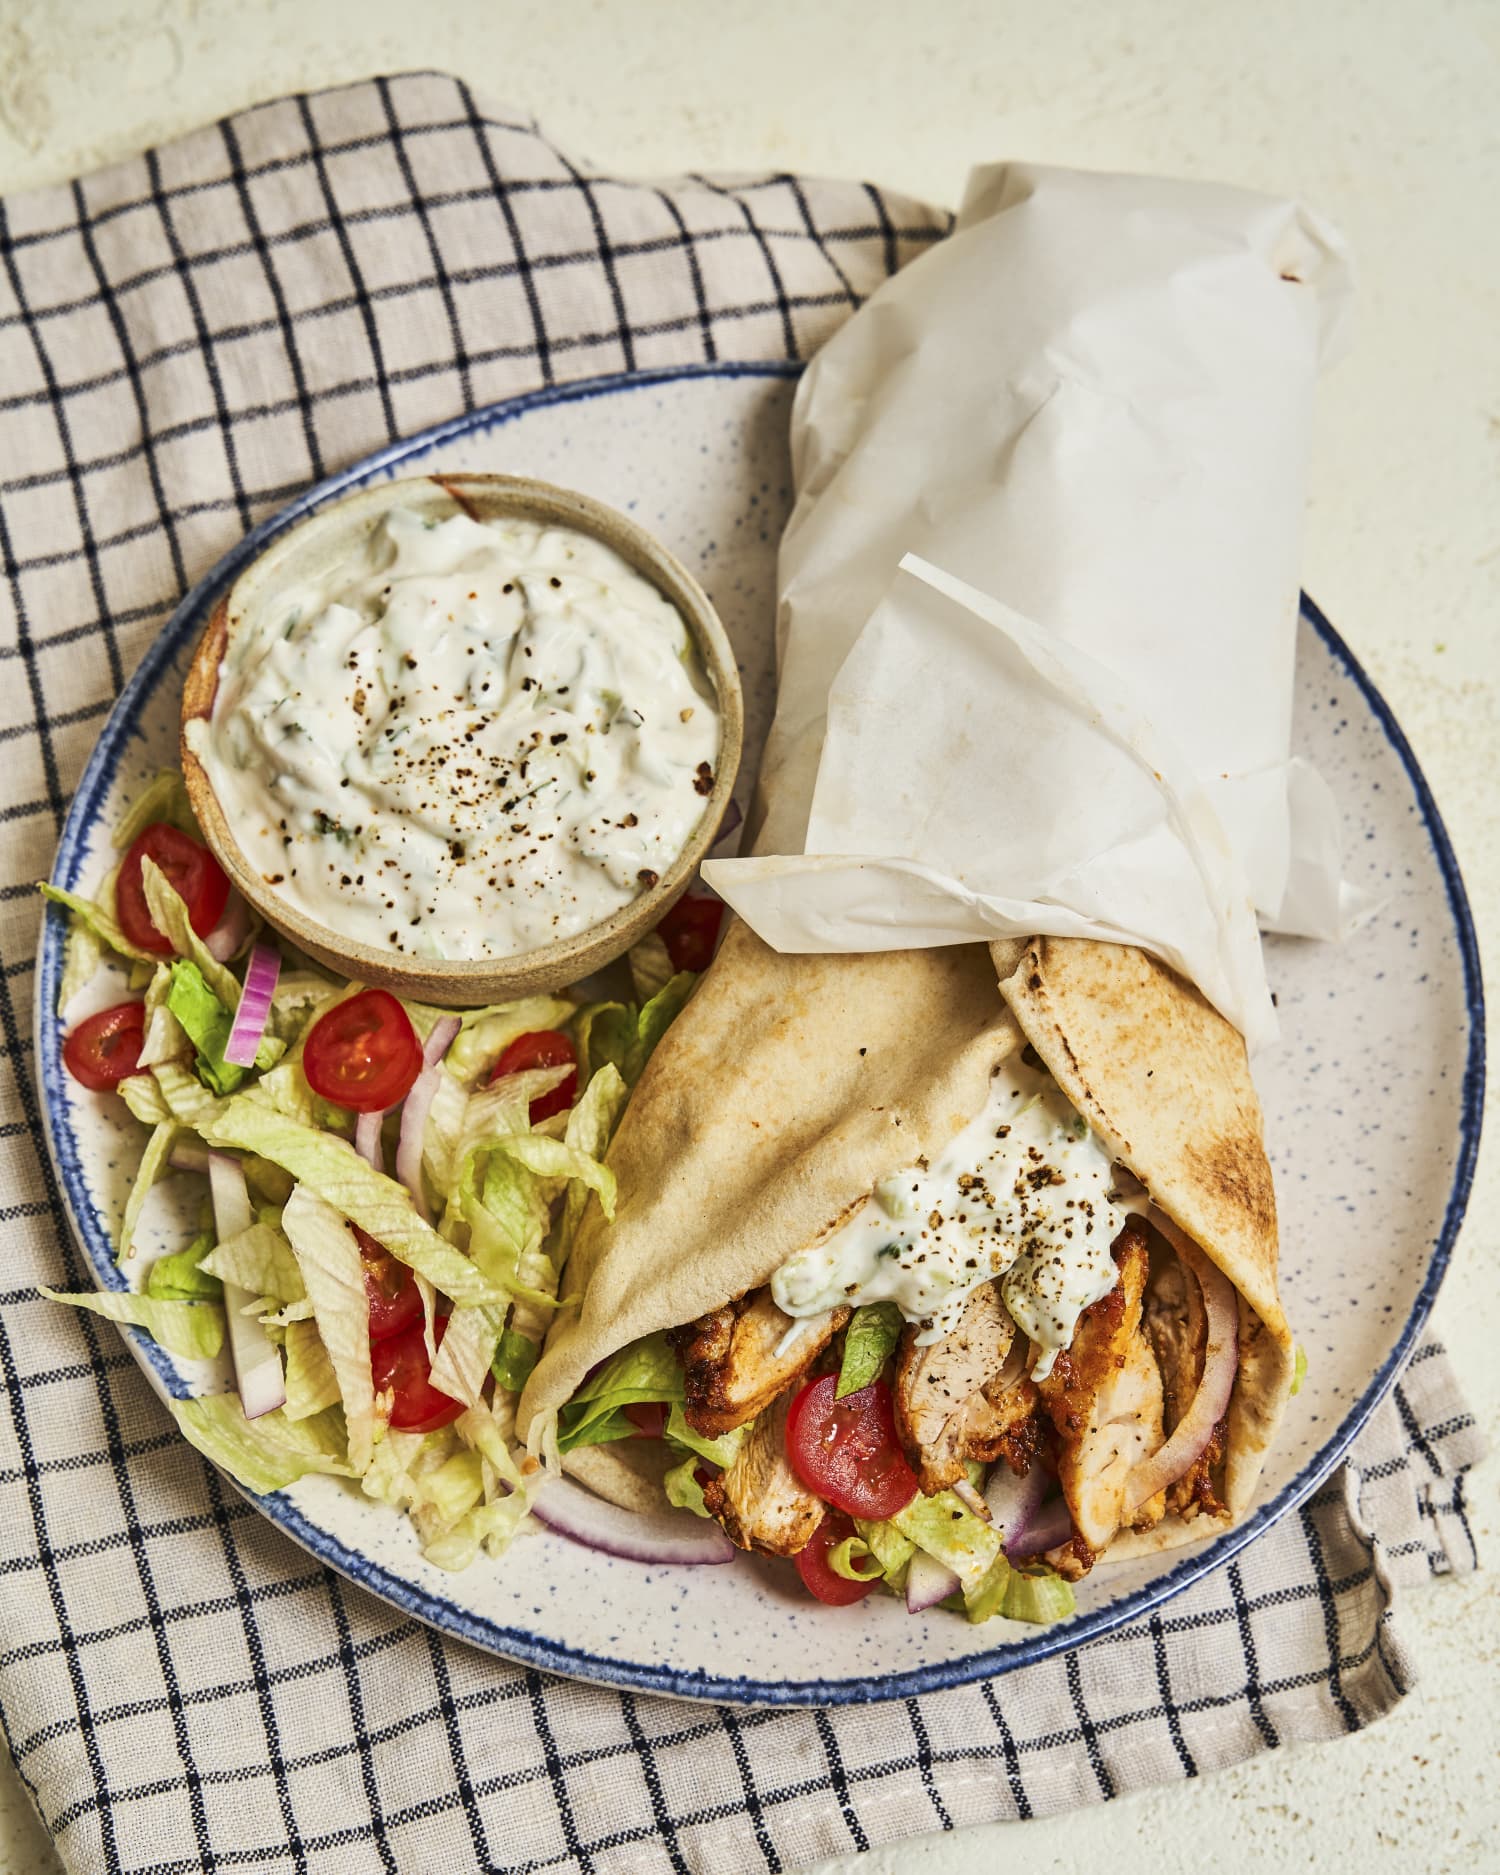 Satisfy Your Street-Food Cravings with Homemade Chicken Gyros